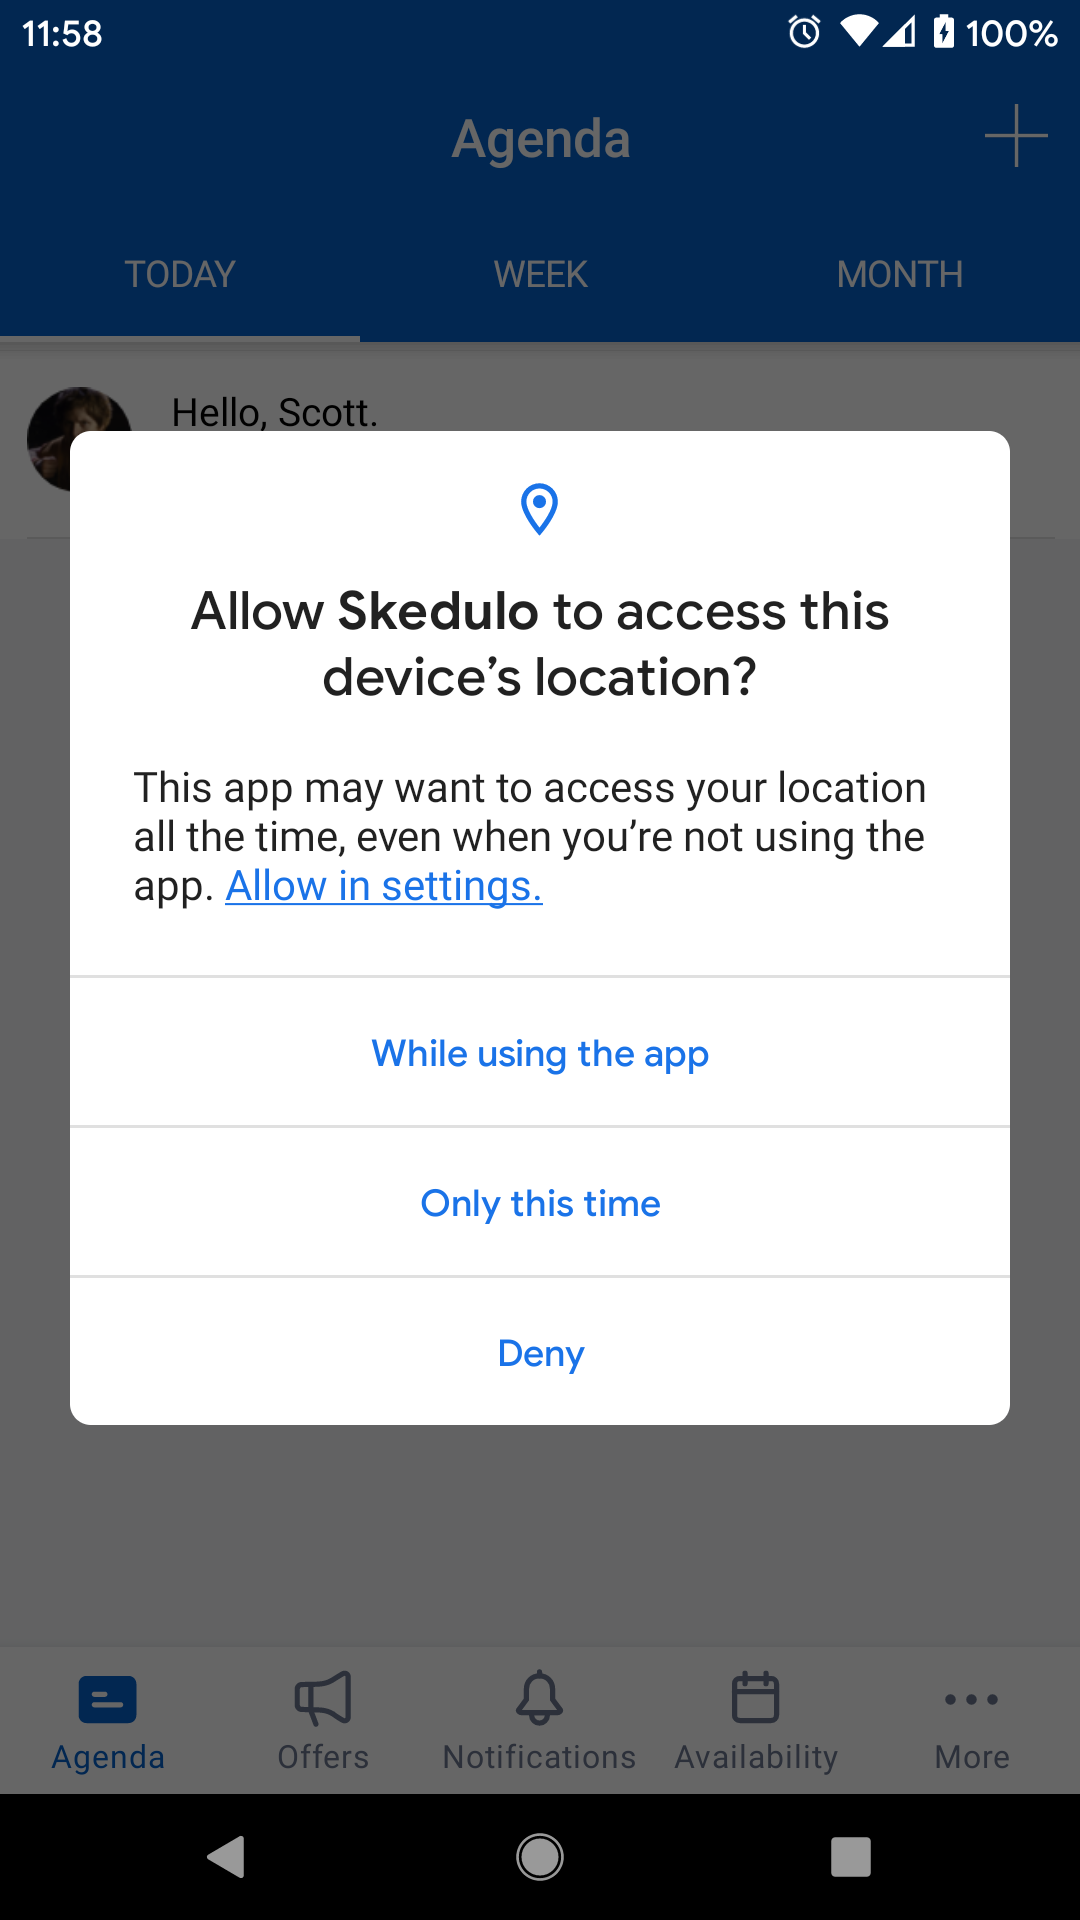 Allow Skedulo to access this device's location? This app may want to access your location all the time, even when you're not using the app. Allow in settings. Options: While using the app, Only this time, Deny.